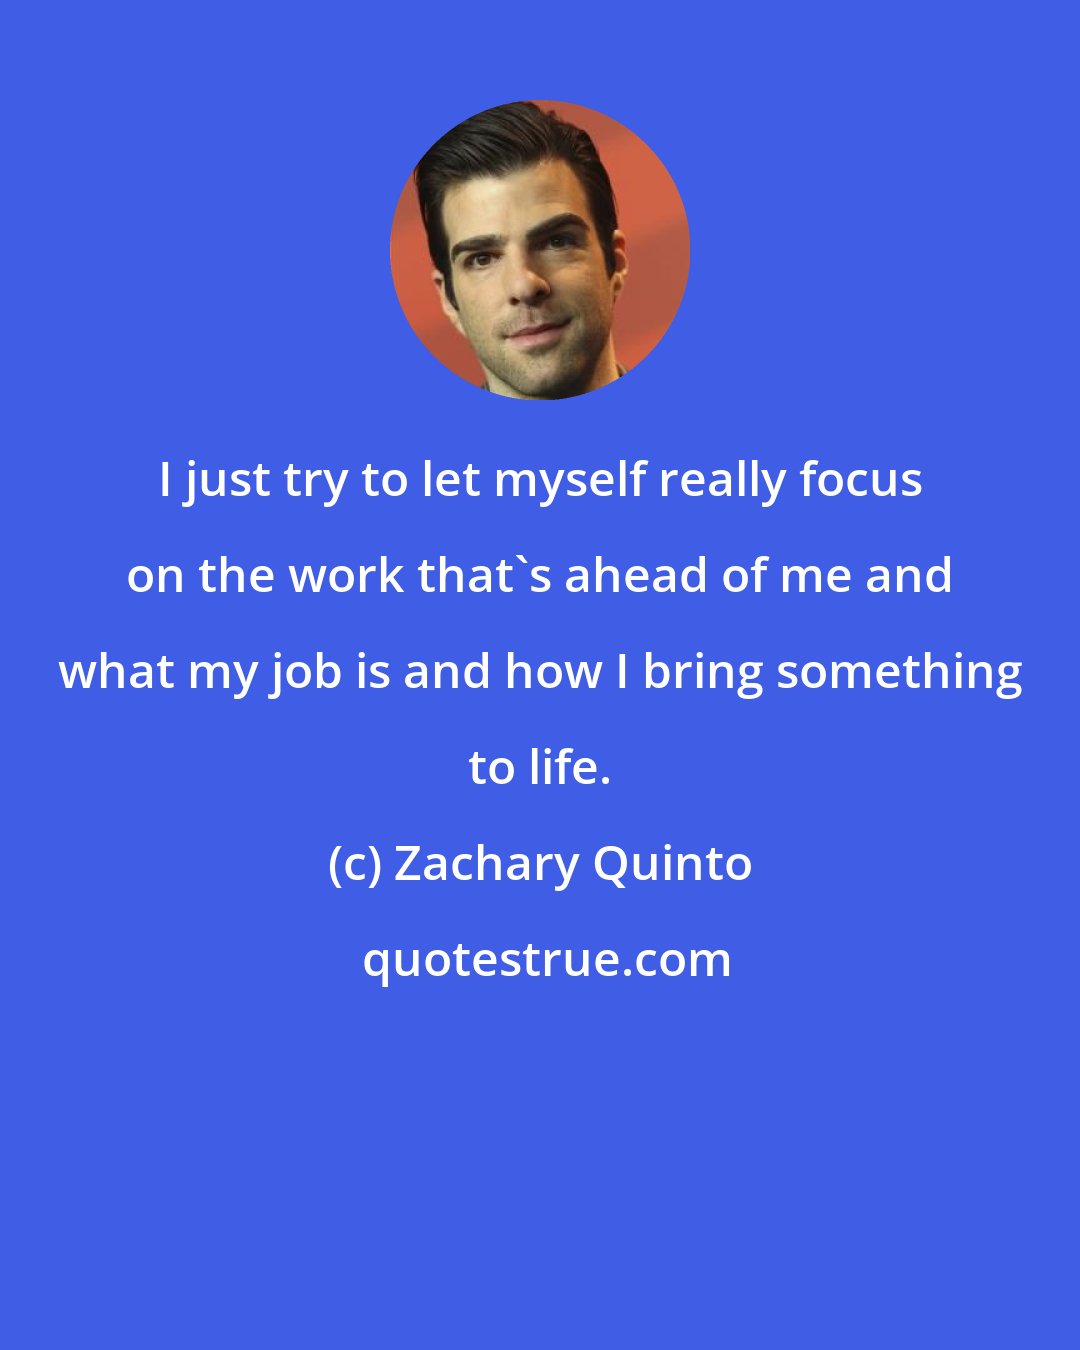 Zachary Quinto: I just try to let myself really focus on the work that's ahead of me and what my job is and how I bring something to life.